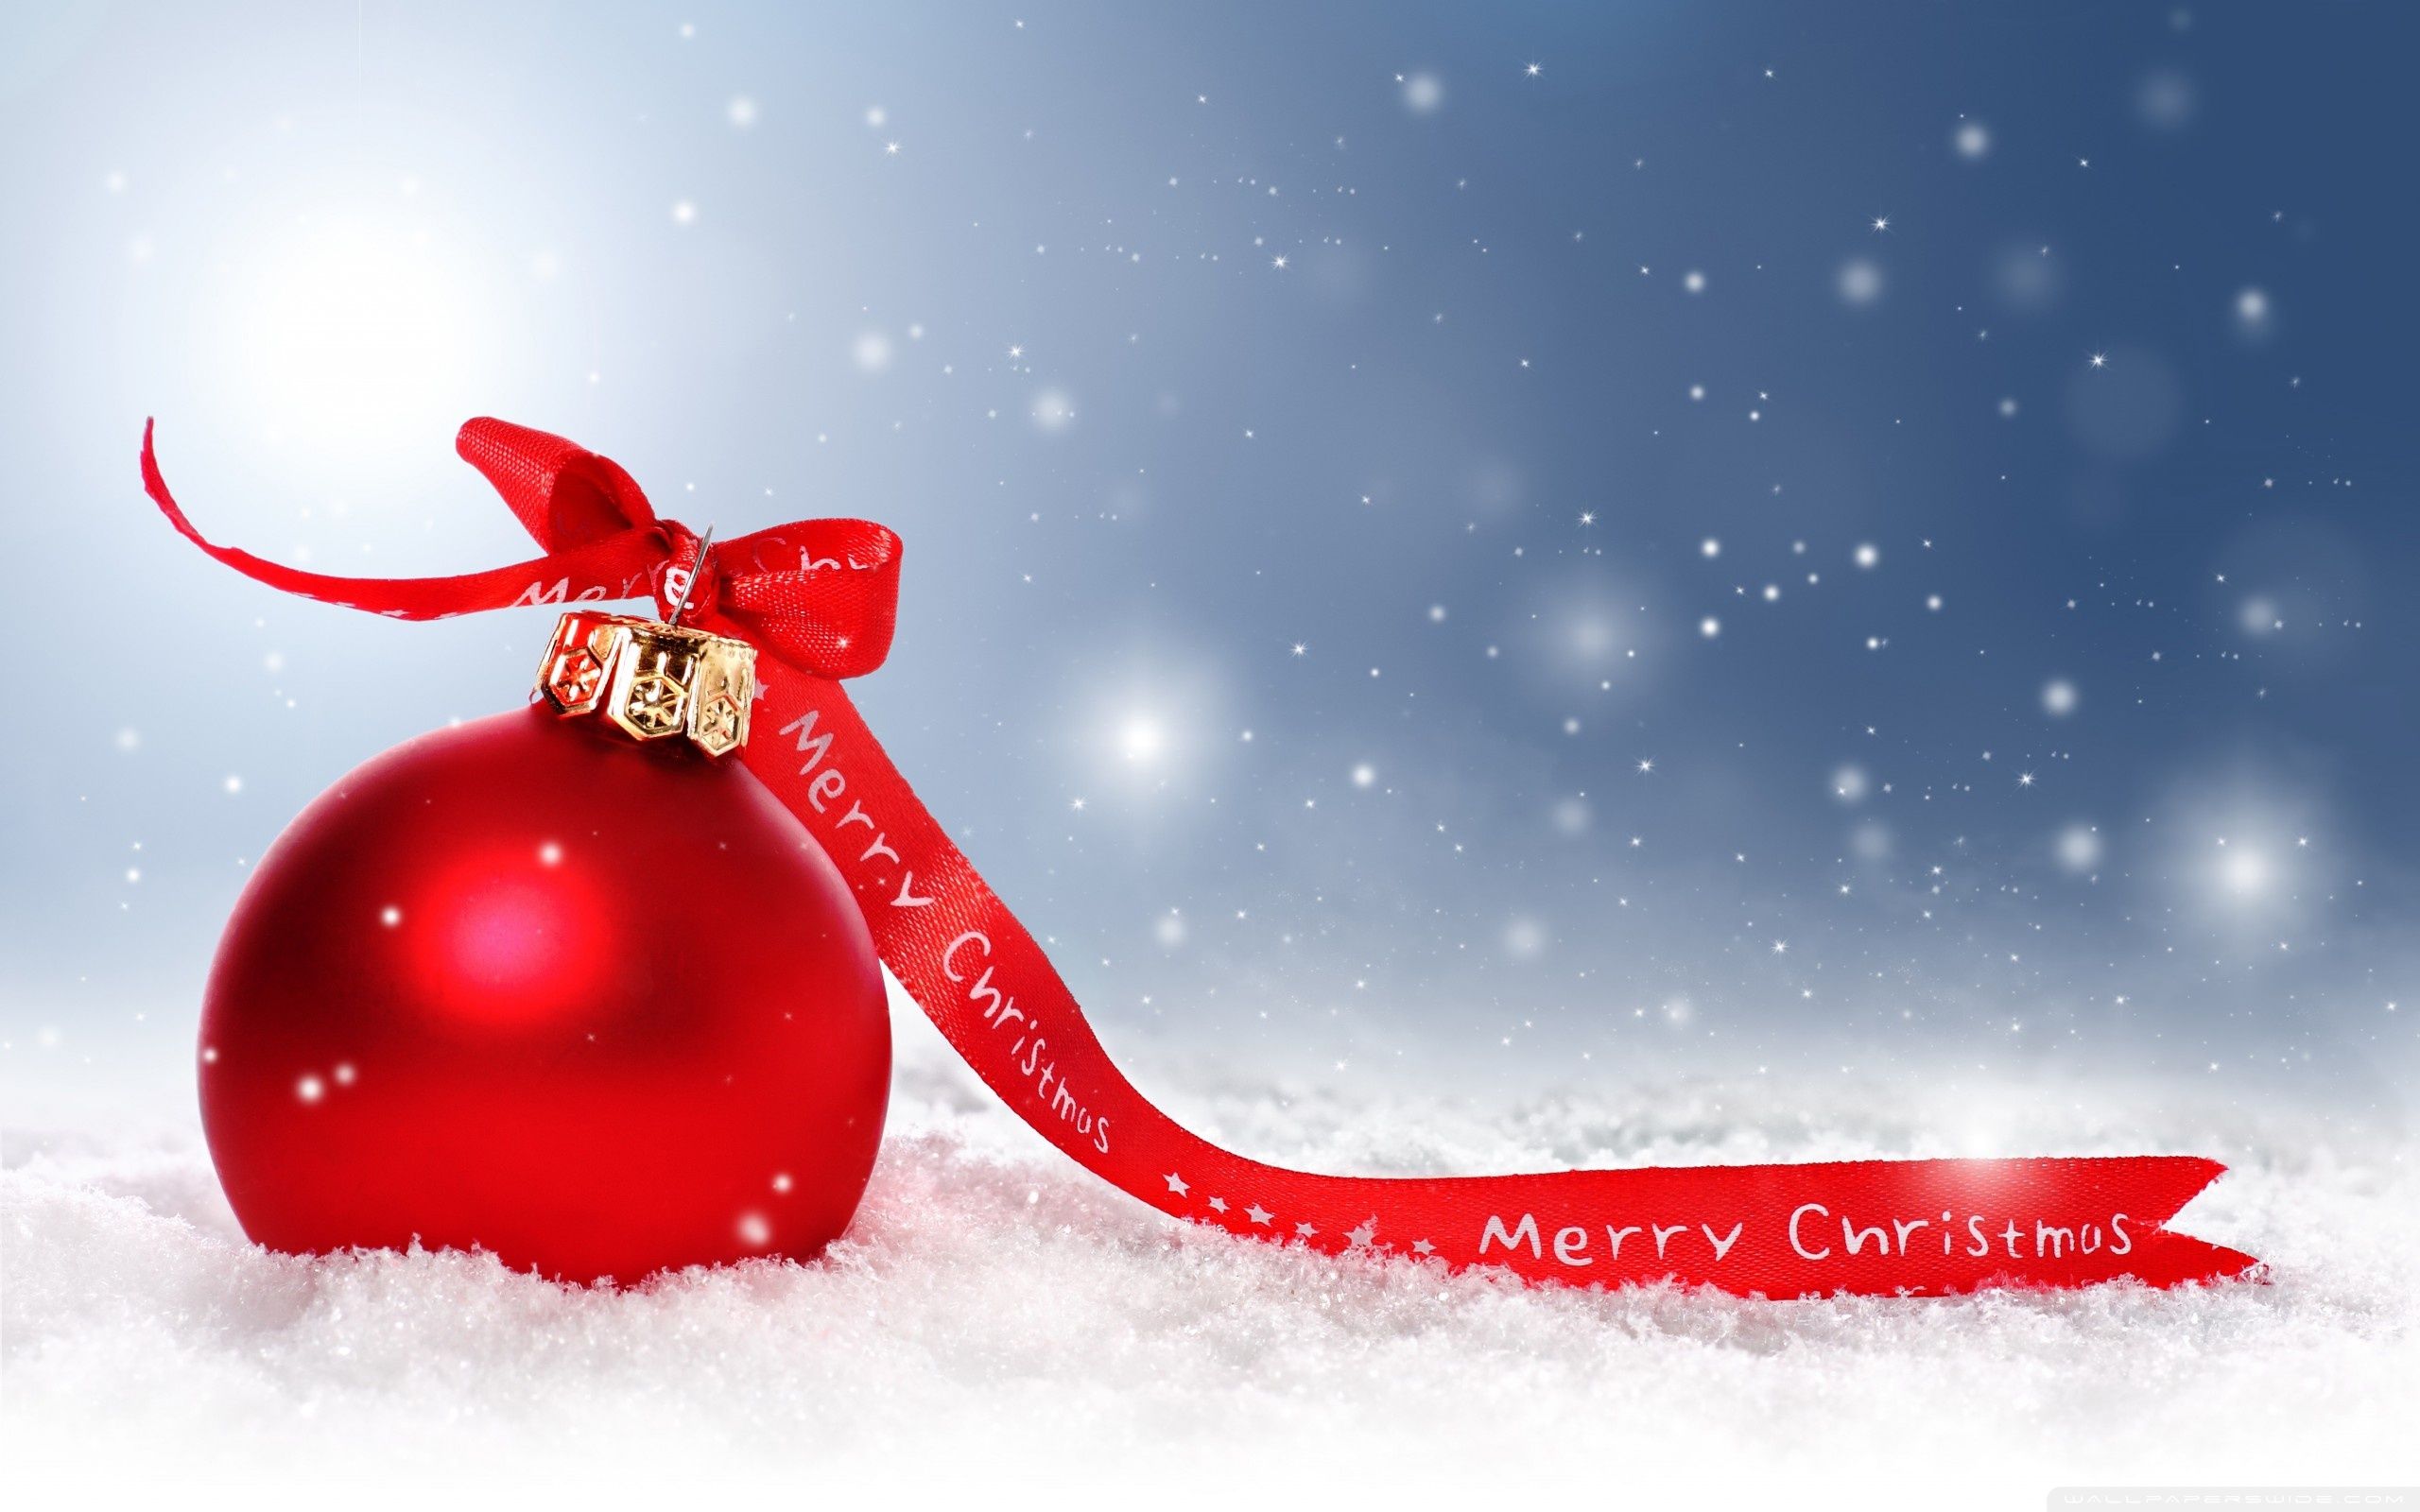 Free Merry Christmas Image, Download Free Clip Art, Free Clip Art on Clipart Library